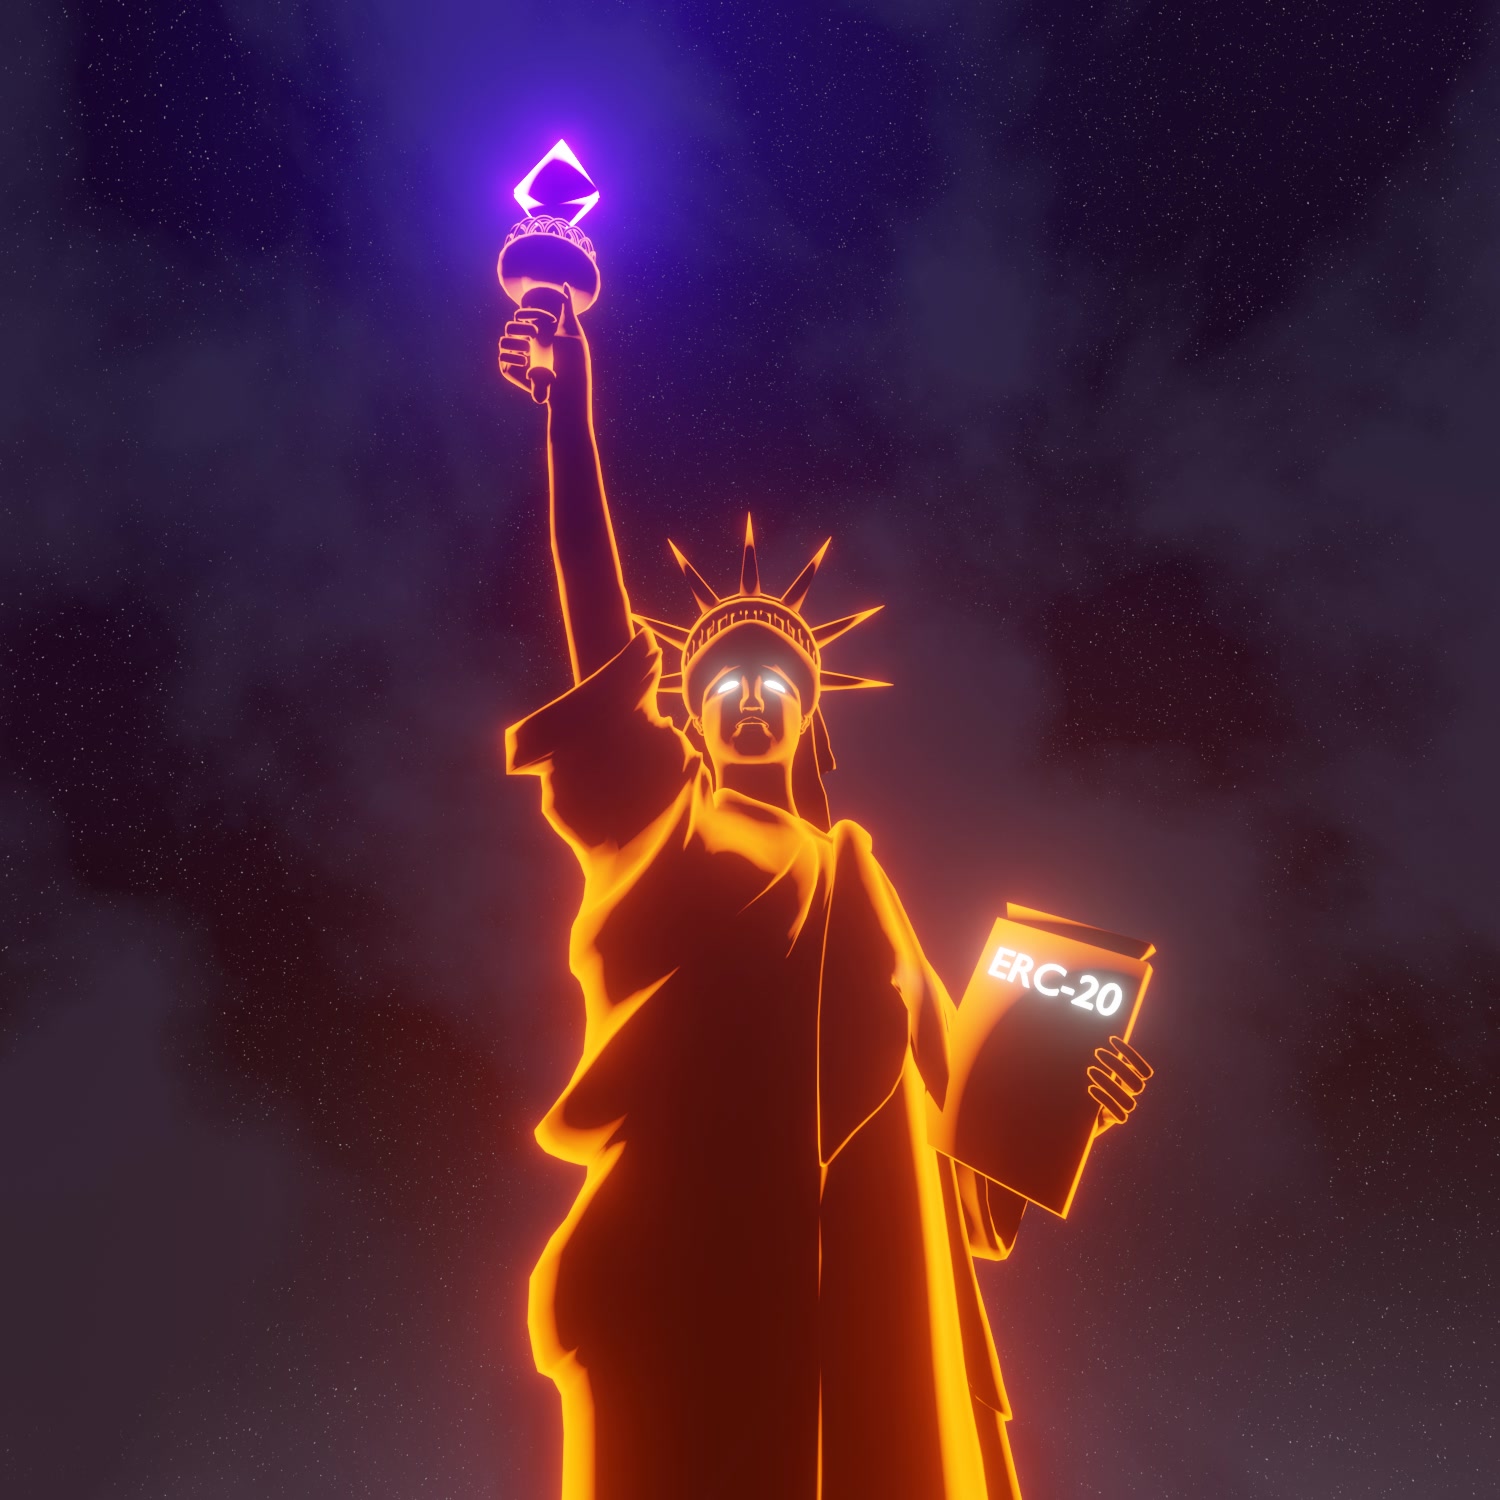 The Statue Of ERC-20